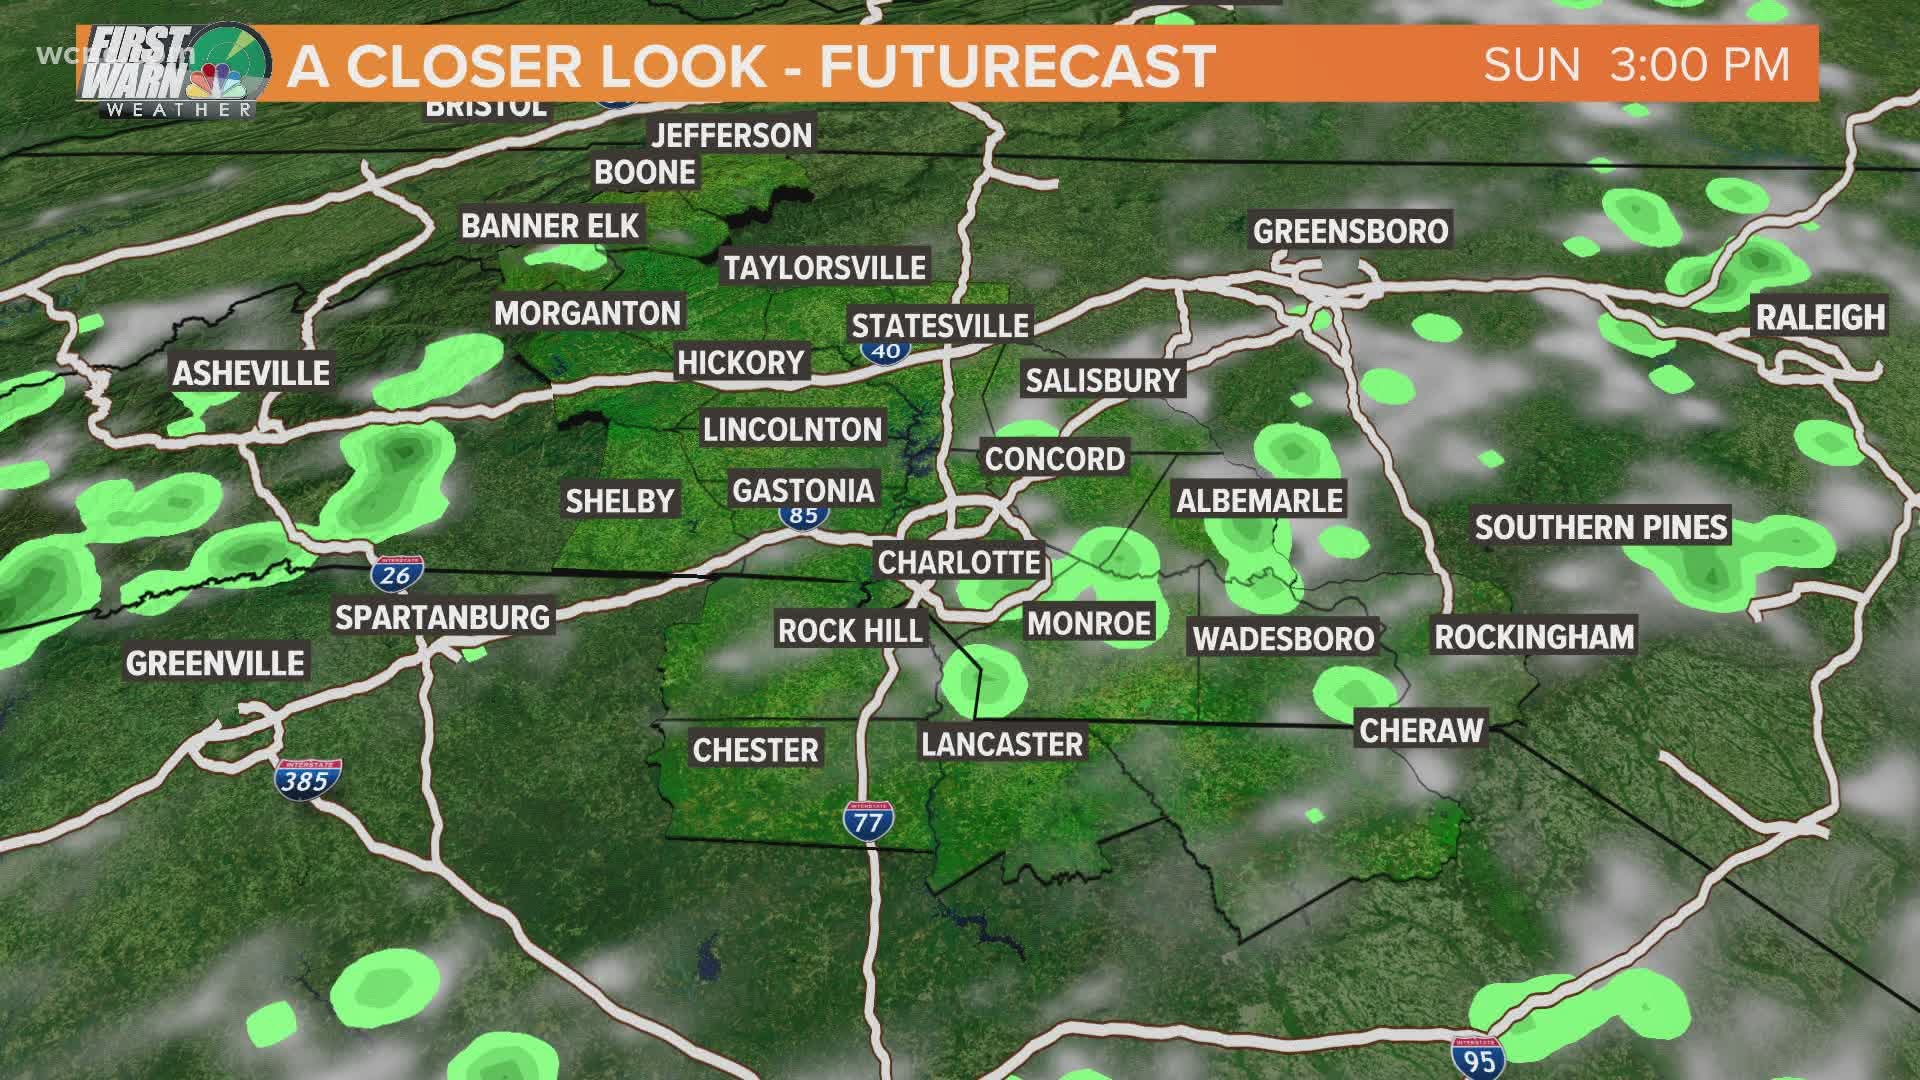 Rain showers isolated today but becoming more scattered tomorrow and Tuesday